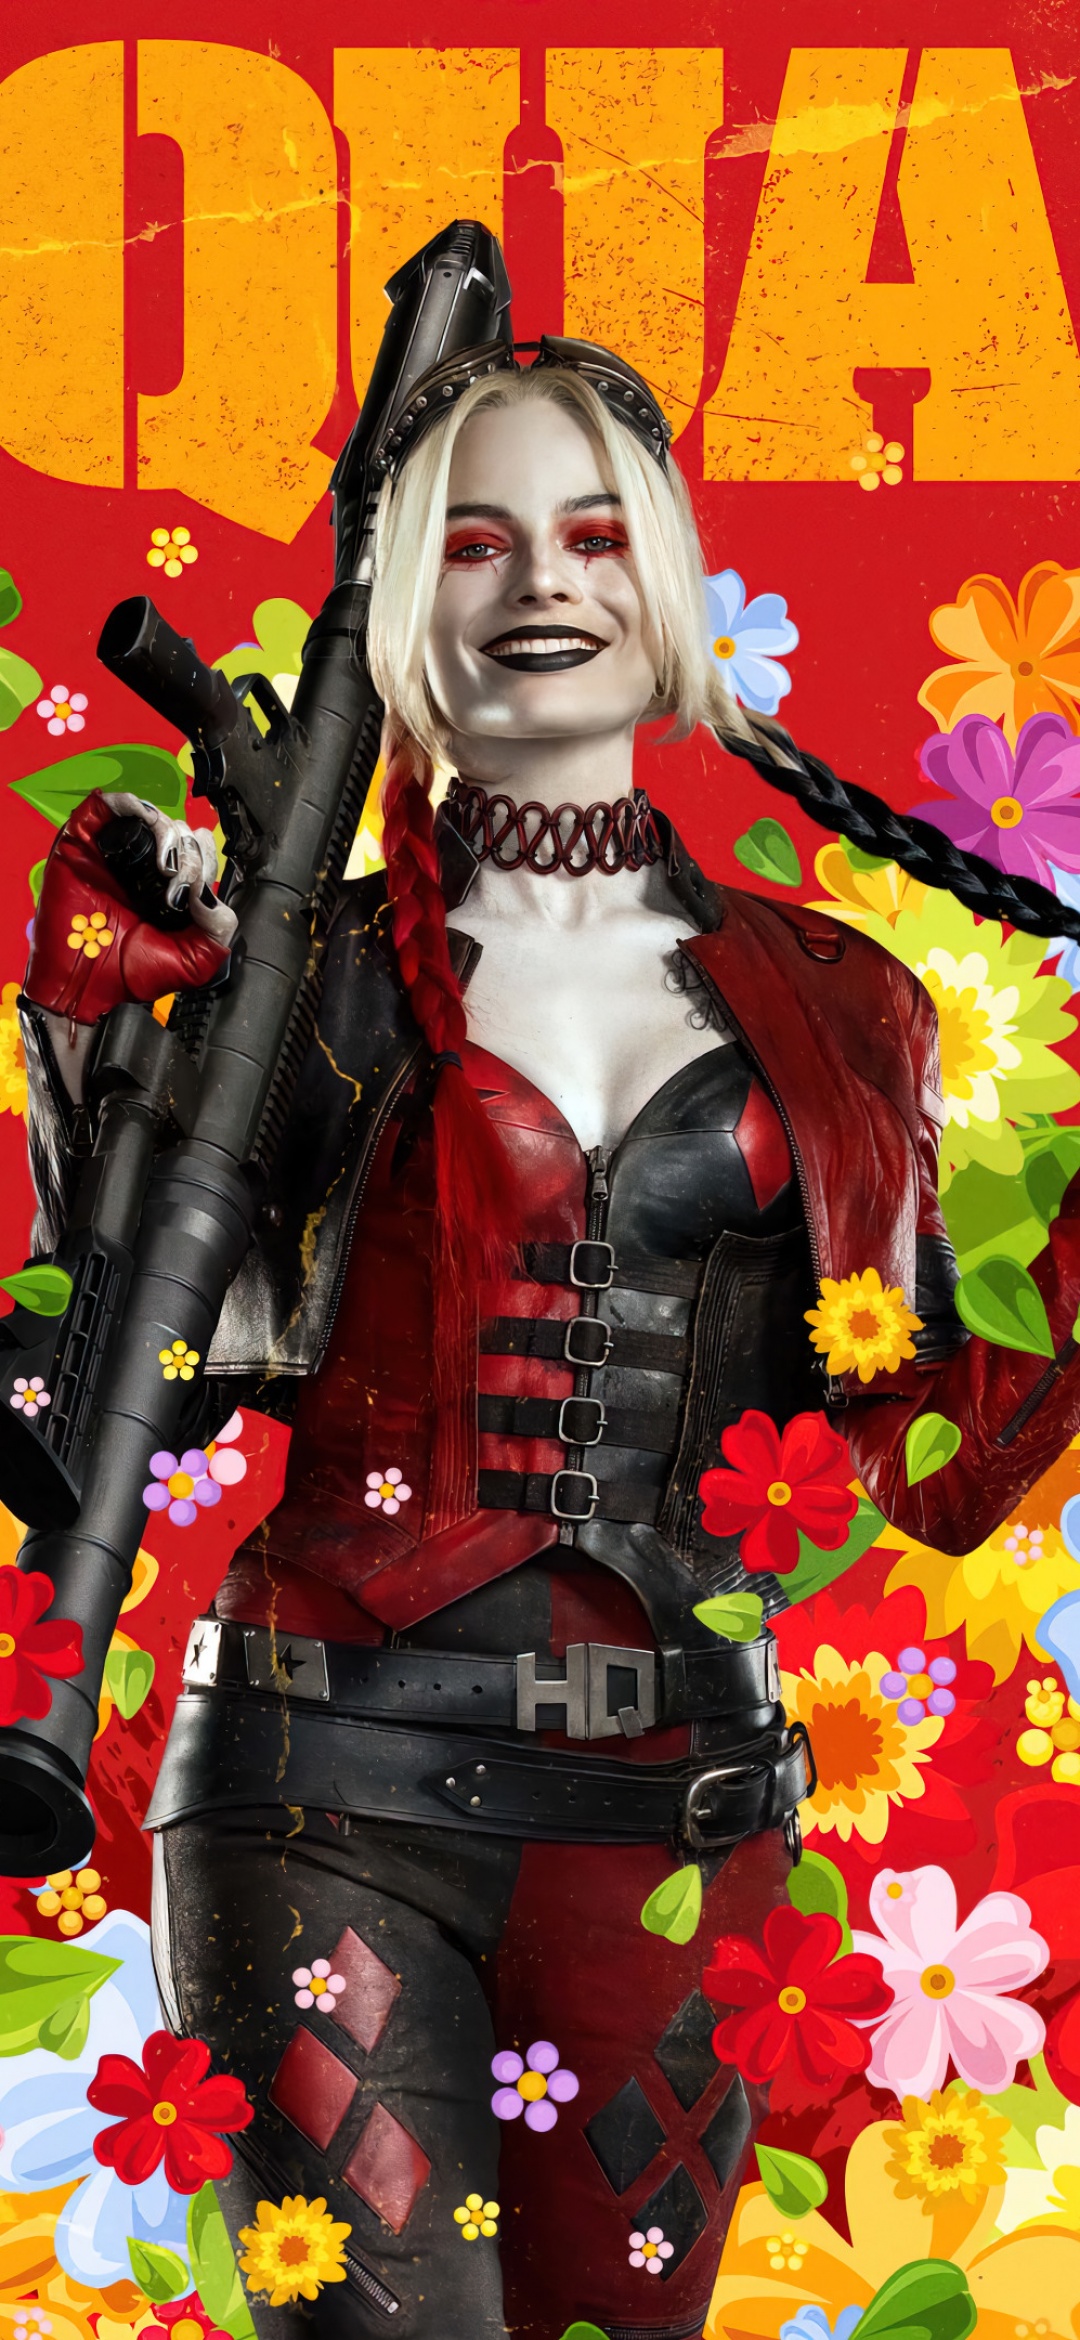 Harley Quinn Wallpaper 4K, Margot Robbie, The Suicide Squad, 2021 Movies, Movies